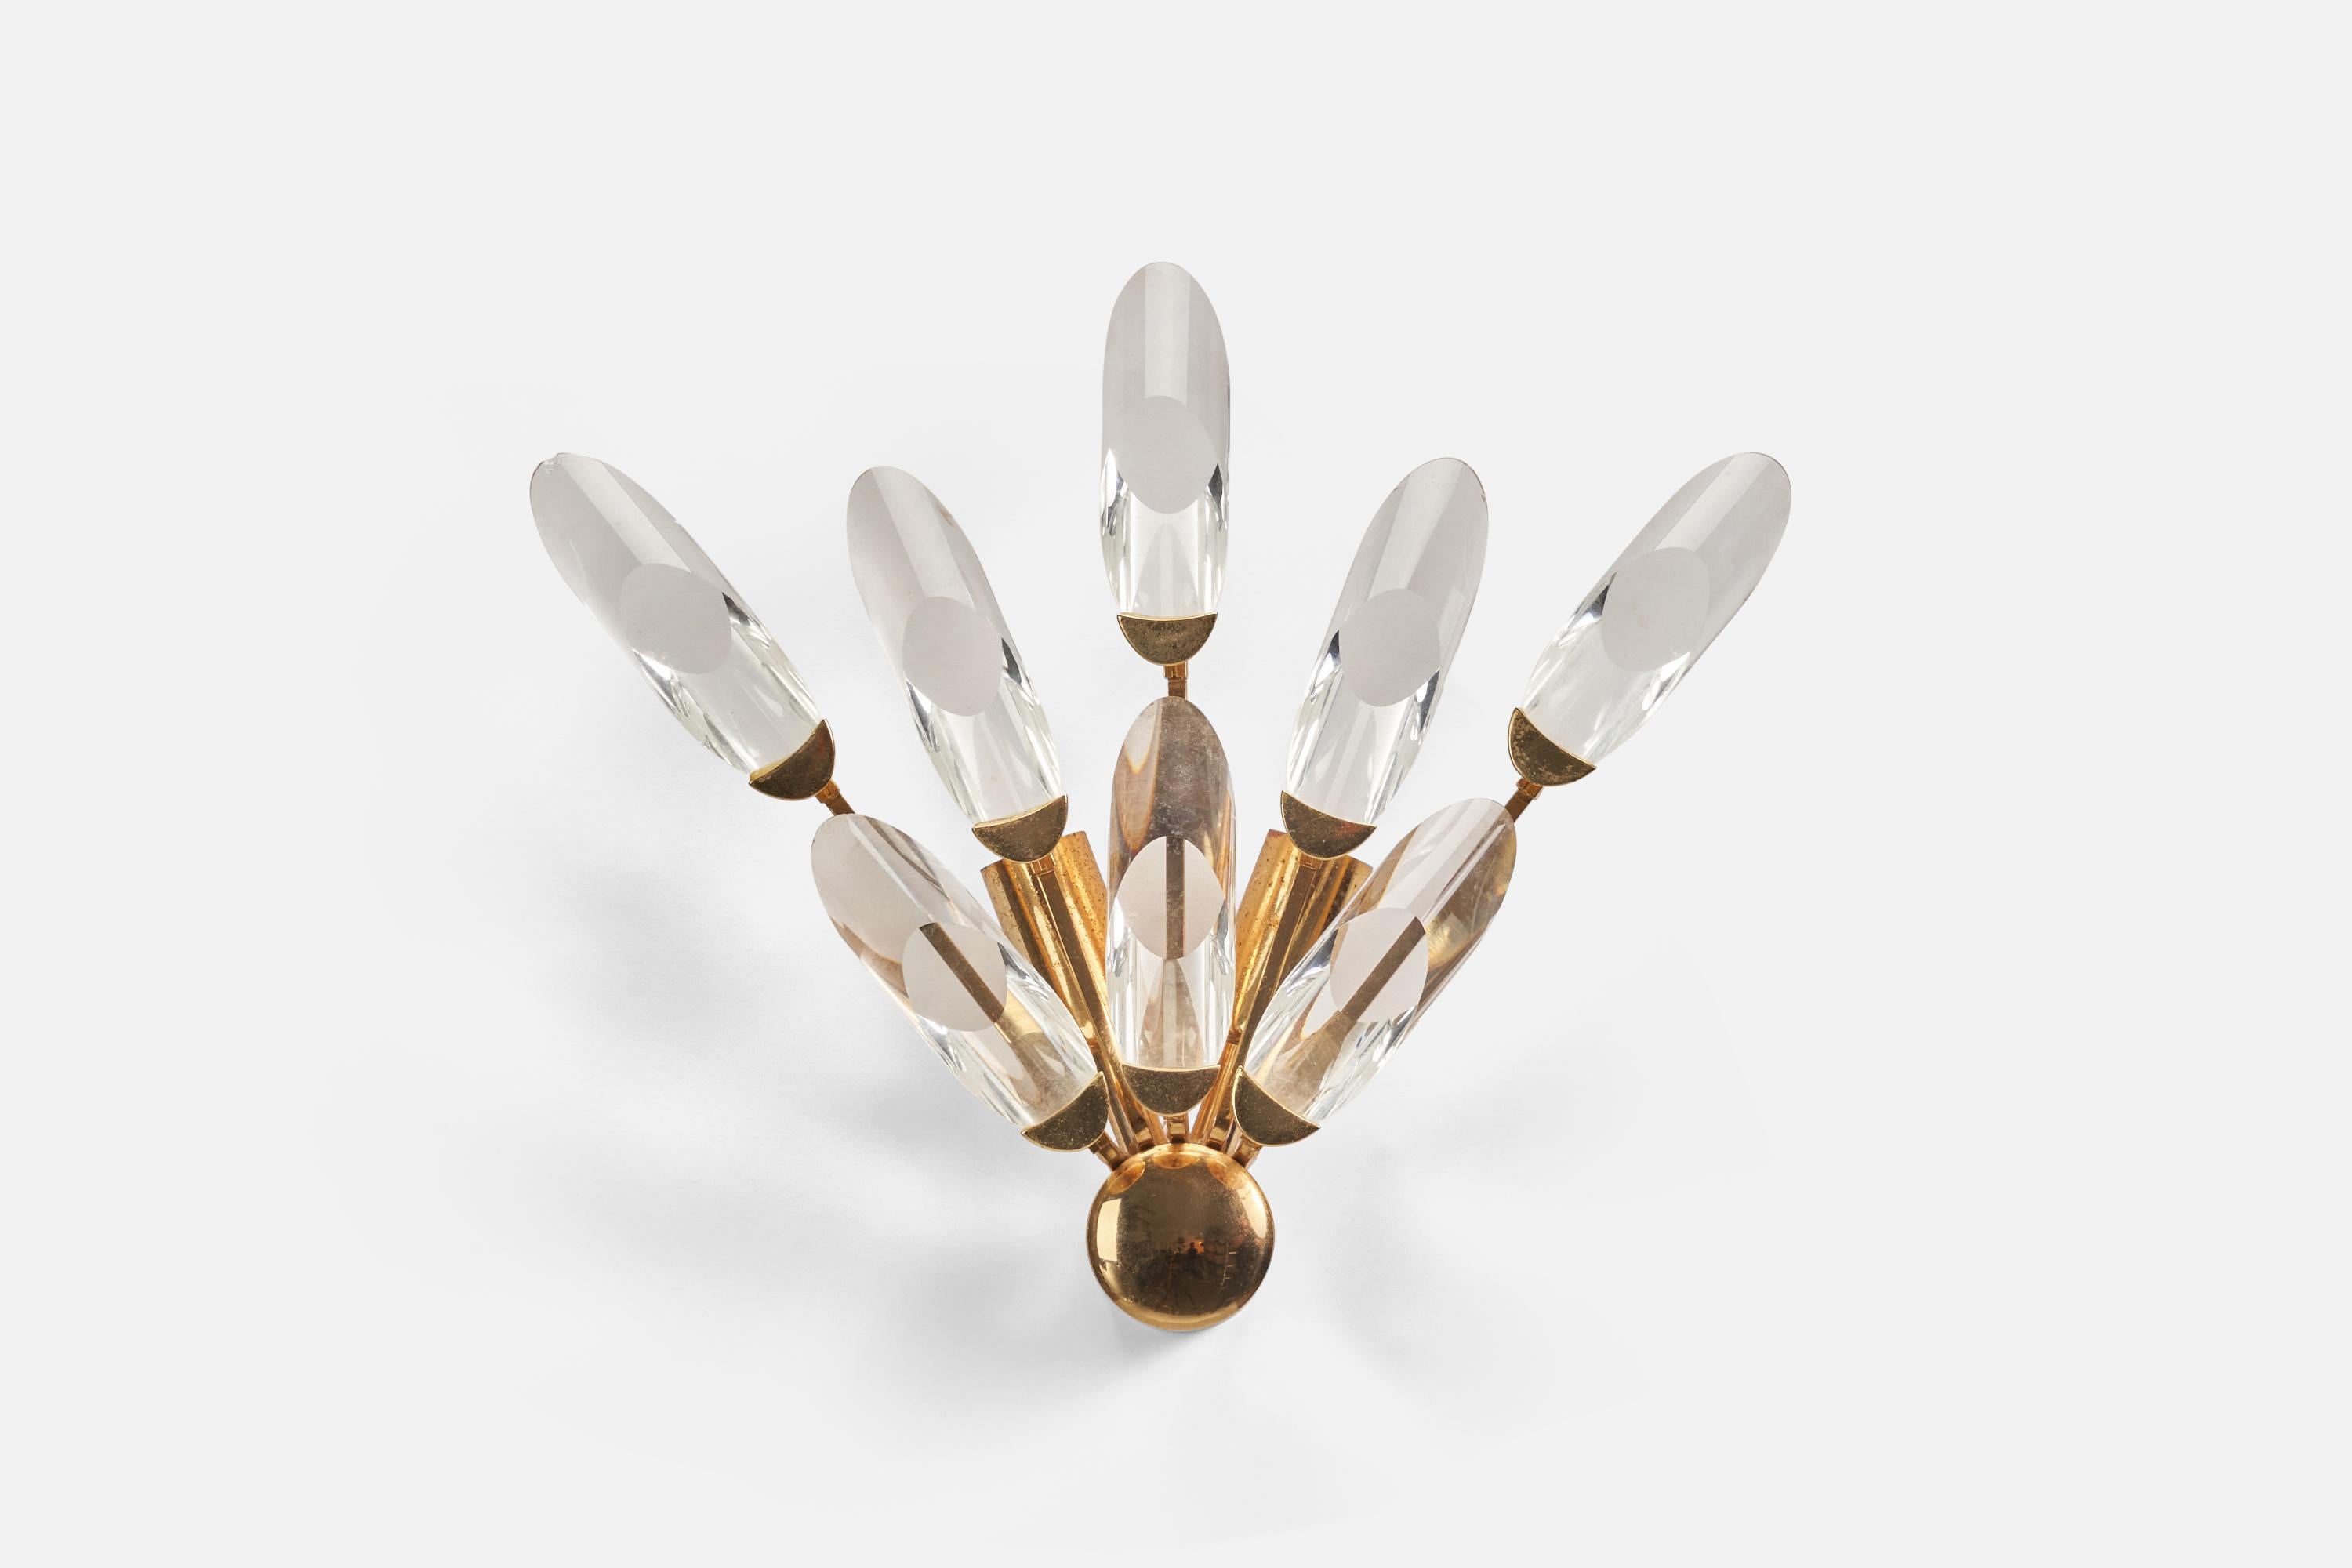 A brass and glass sconce designed and produced in Italy, 1980s. 

Dimensions of Back Plate (inches) : 1.96 x 1.96 x 2.85 (Height x Width x Depth)

Sockets take E-14 bulbs.

There is no maximum wattage stated on the fixture.